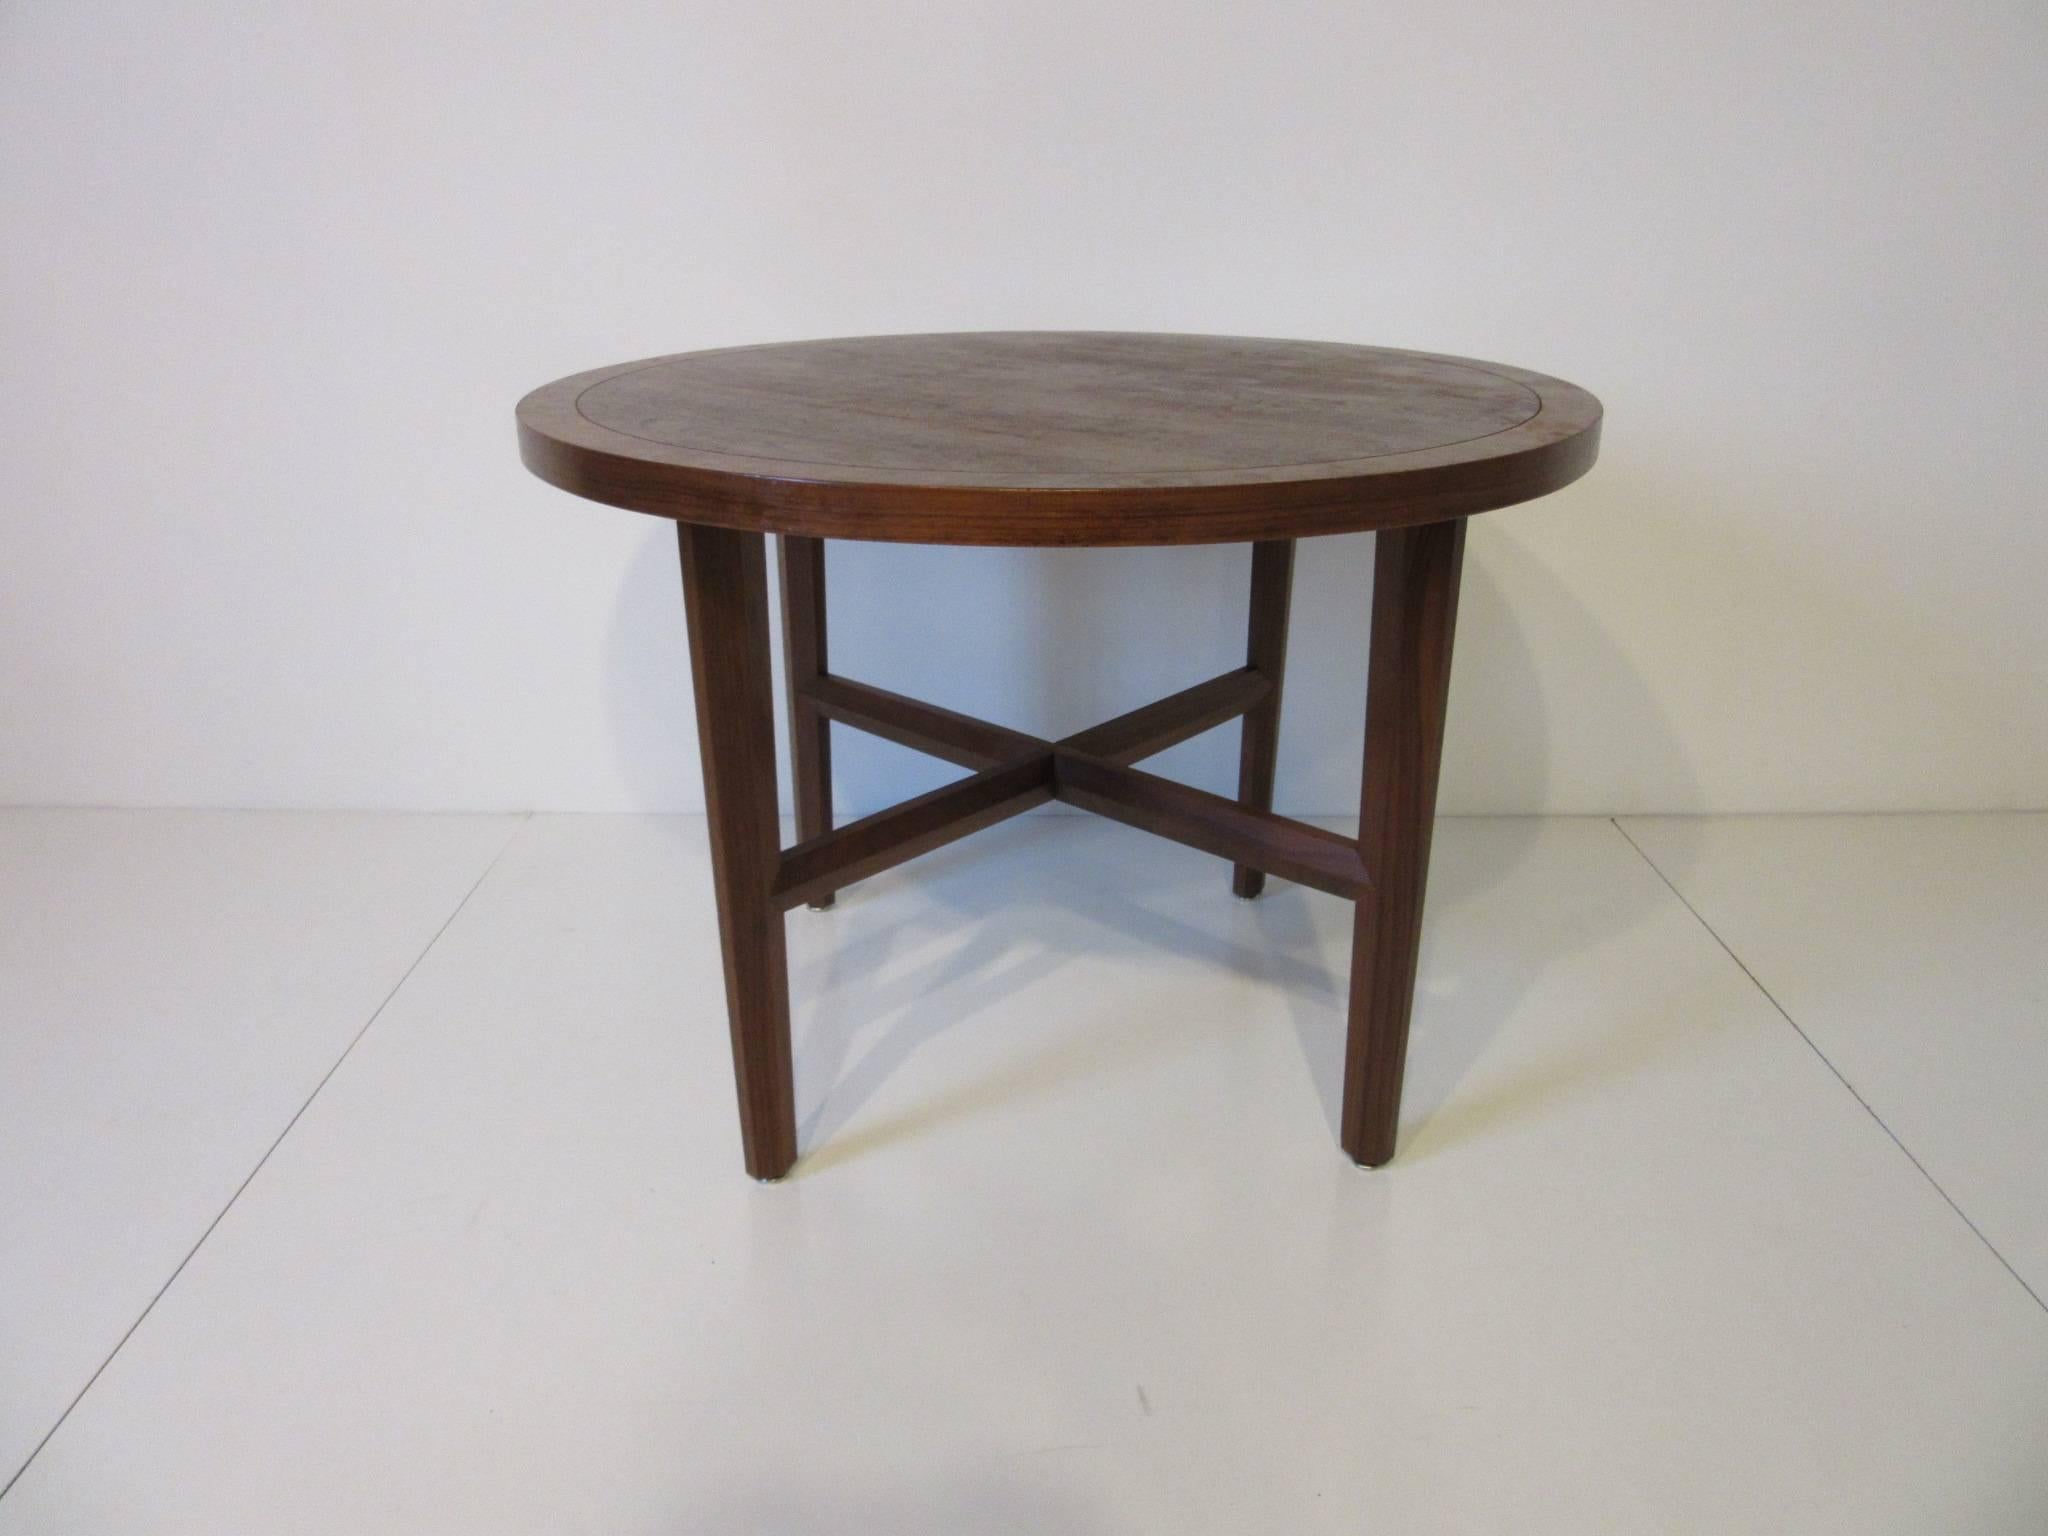 A round Carpathian exotic wood side or lamp table in an oil finish with four tapered and bevelled legs and stretchers designed by George Nakashima. This table comes from Nakashima's only mass produced furniture line named the origins collection by